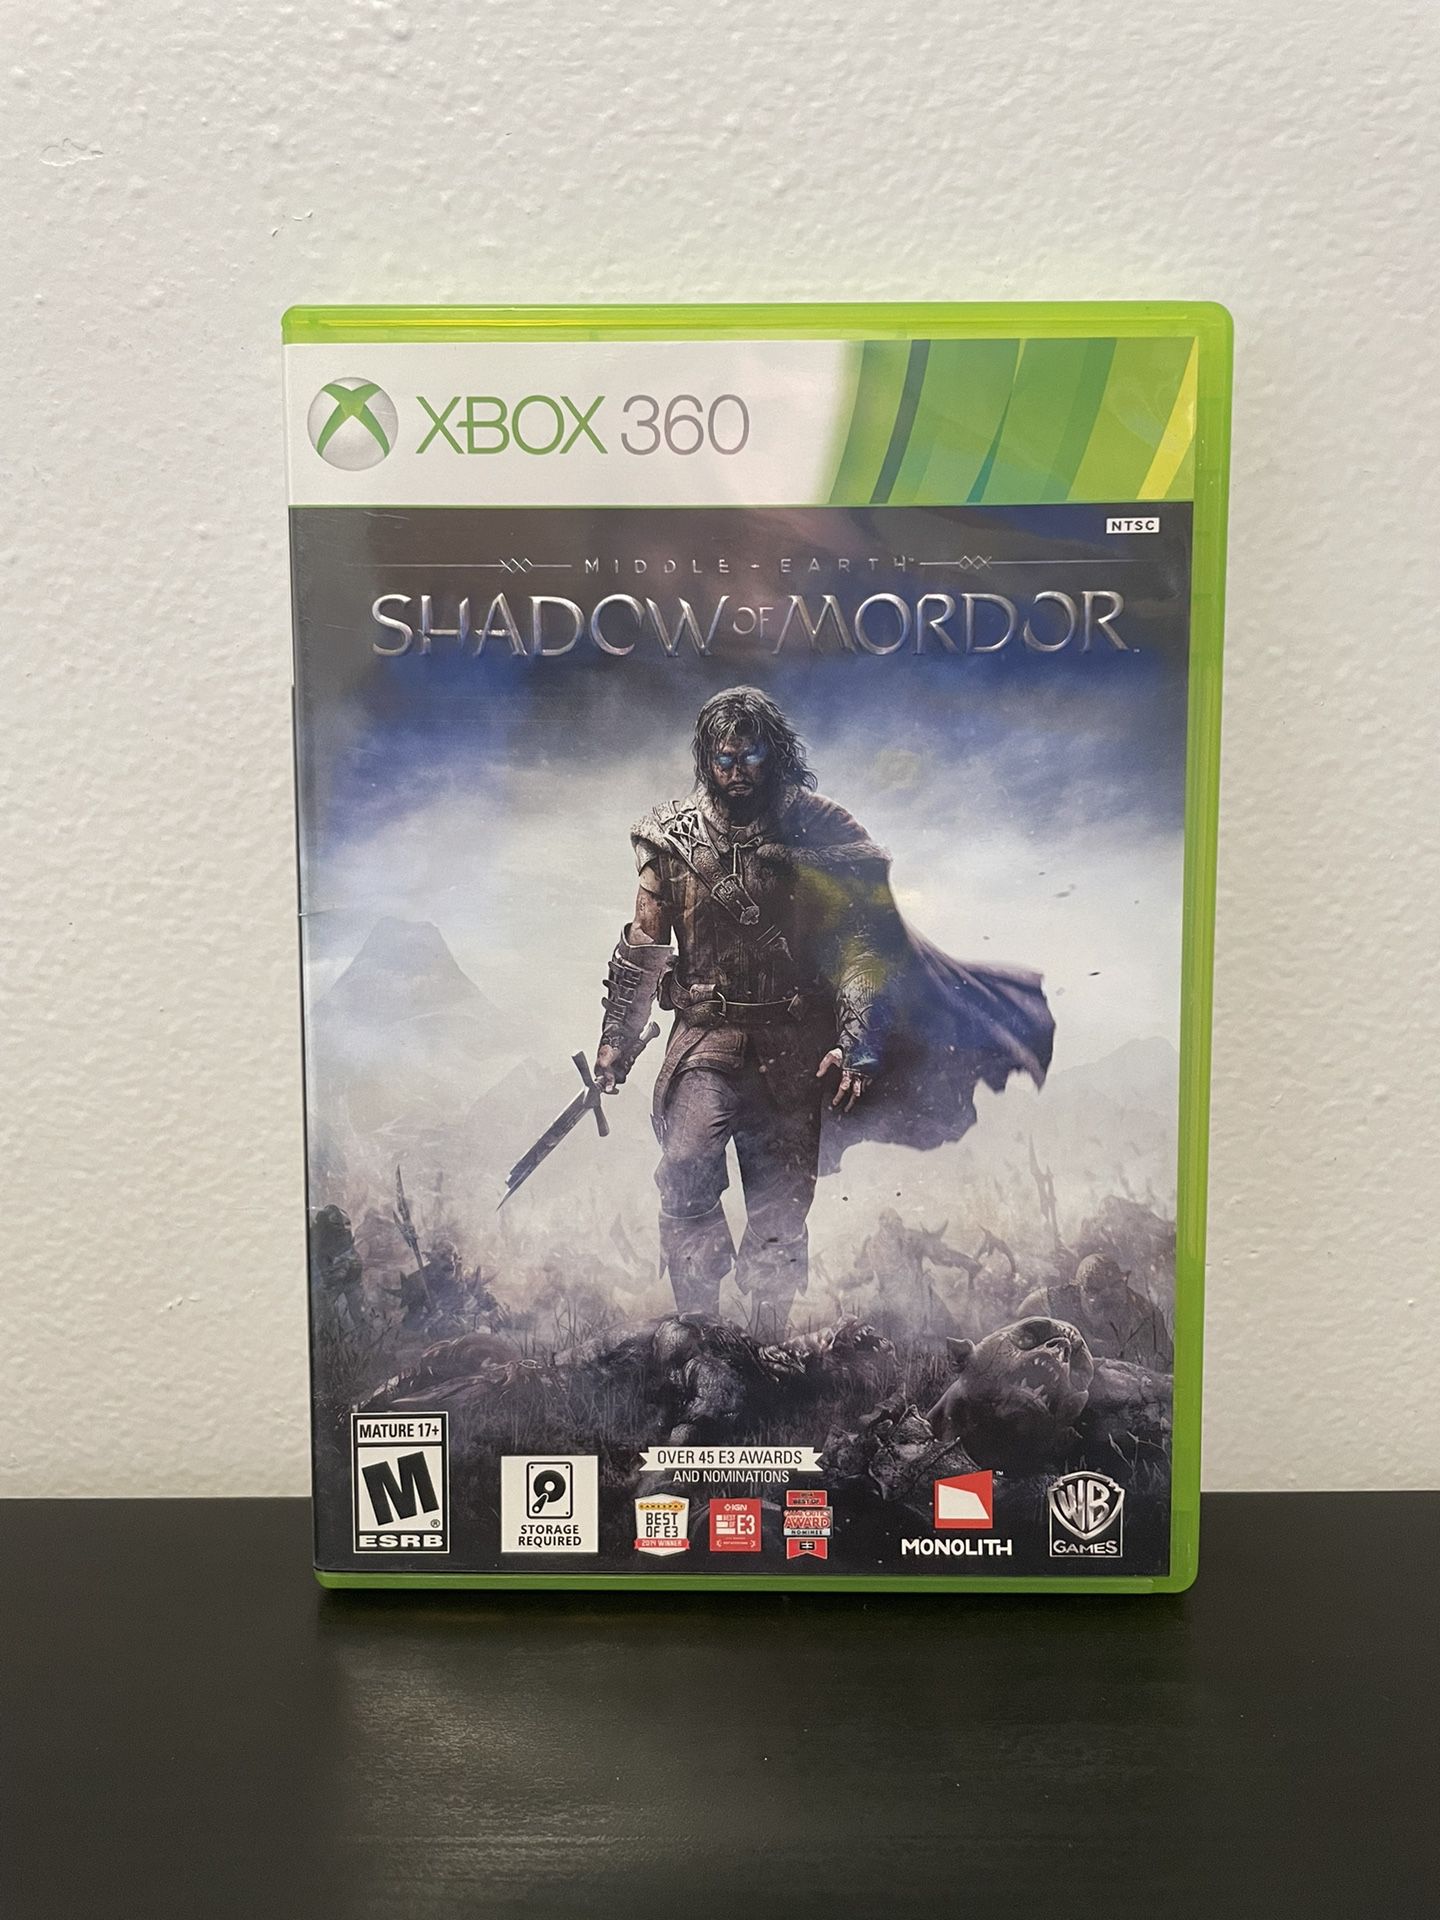 Middle Earth Shadow of Mordor Xbox 360 Like New w/ Inserts Video Game LOTR